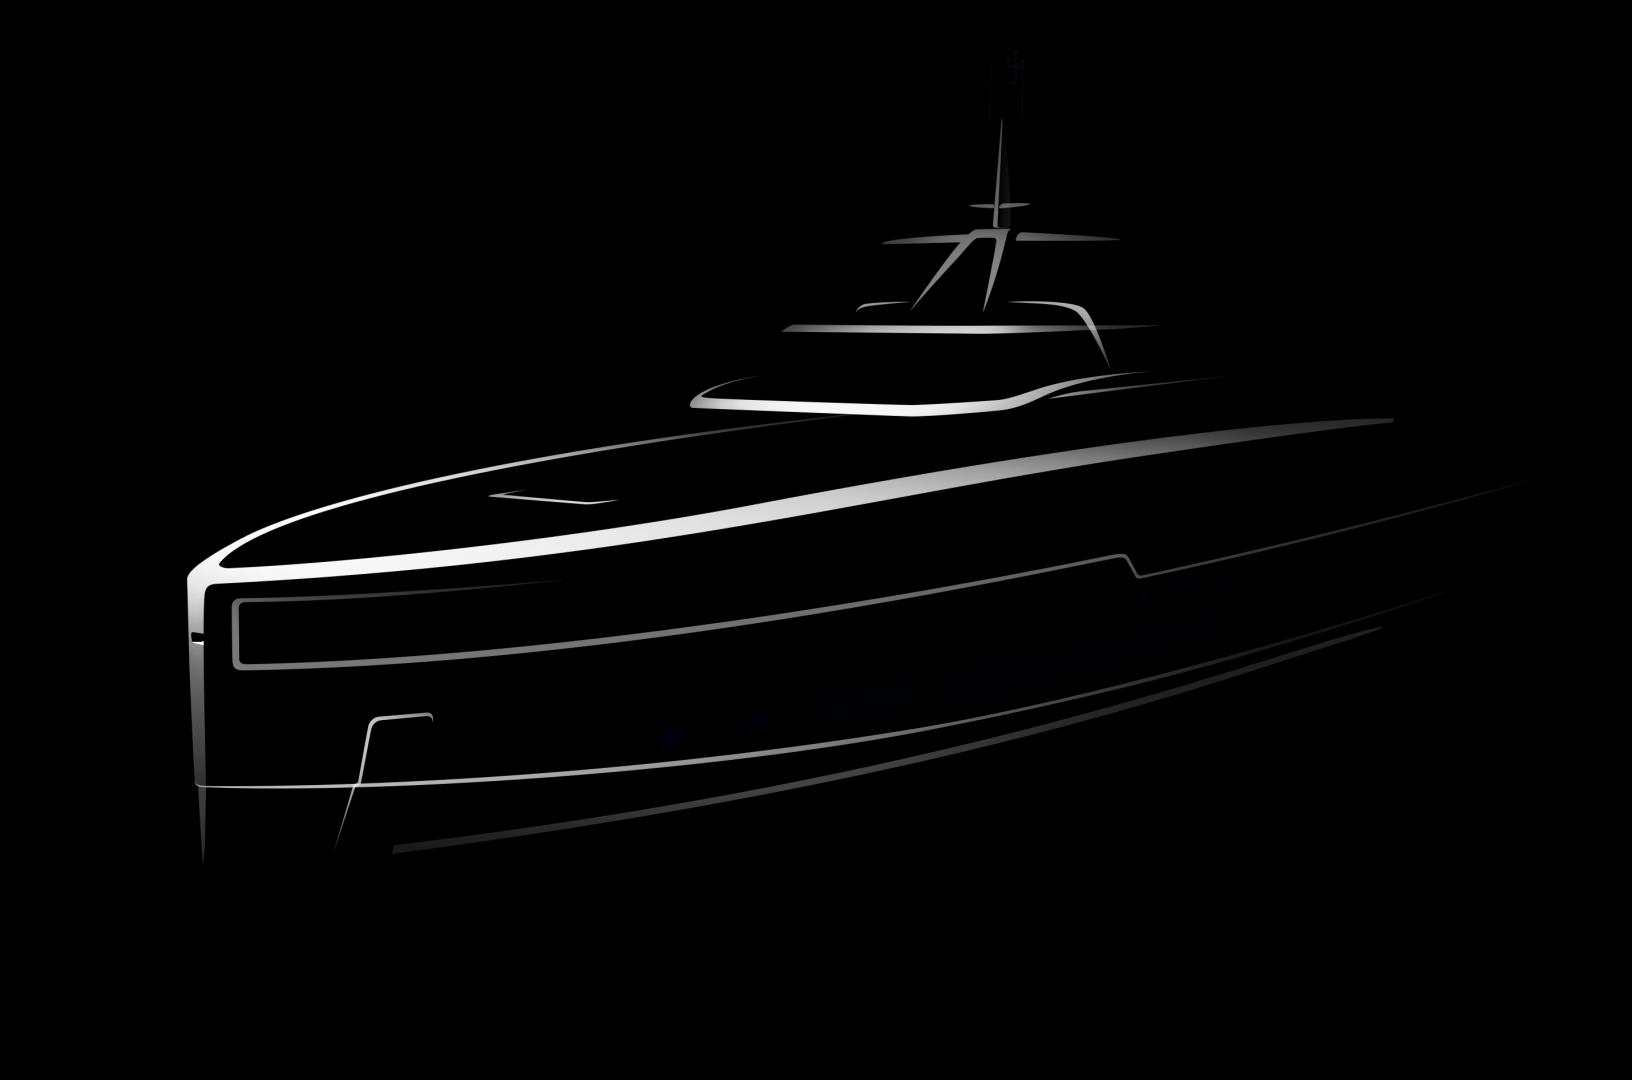 The new Baglietto 40m RPH in all aluminum expected in 2020